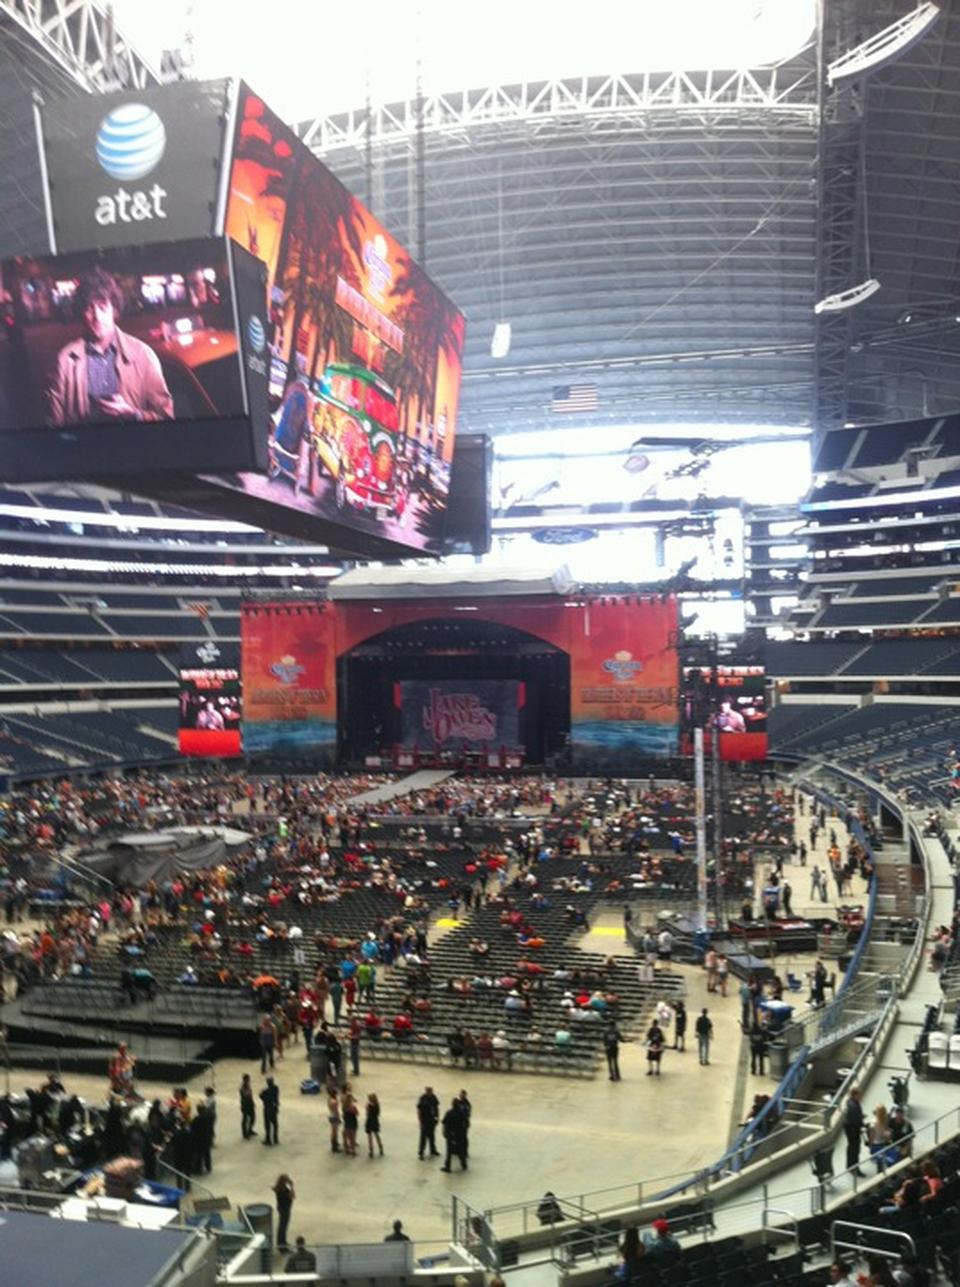 section 219 seat view  for concert - at&t stadium (cowboys stadium)